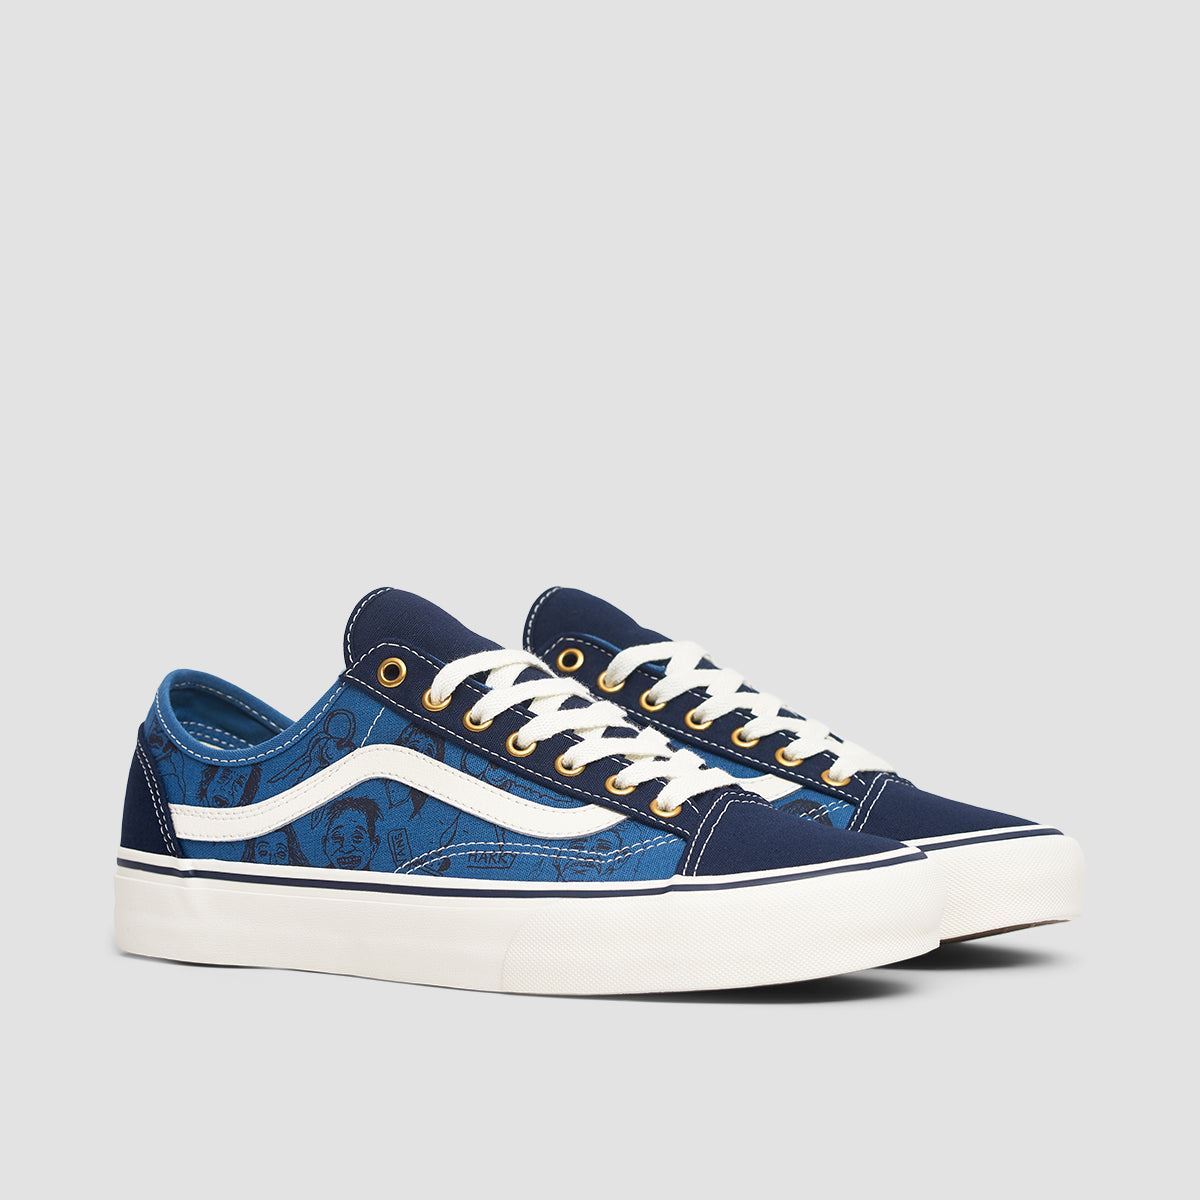 Vans Style 36 Decon VR3 SF Shoes - Harry Bryant Navy/Navy